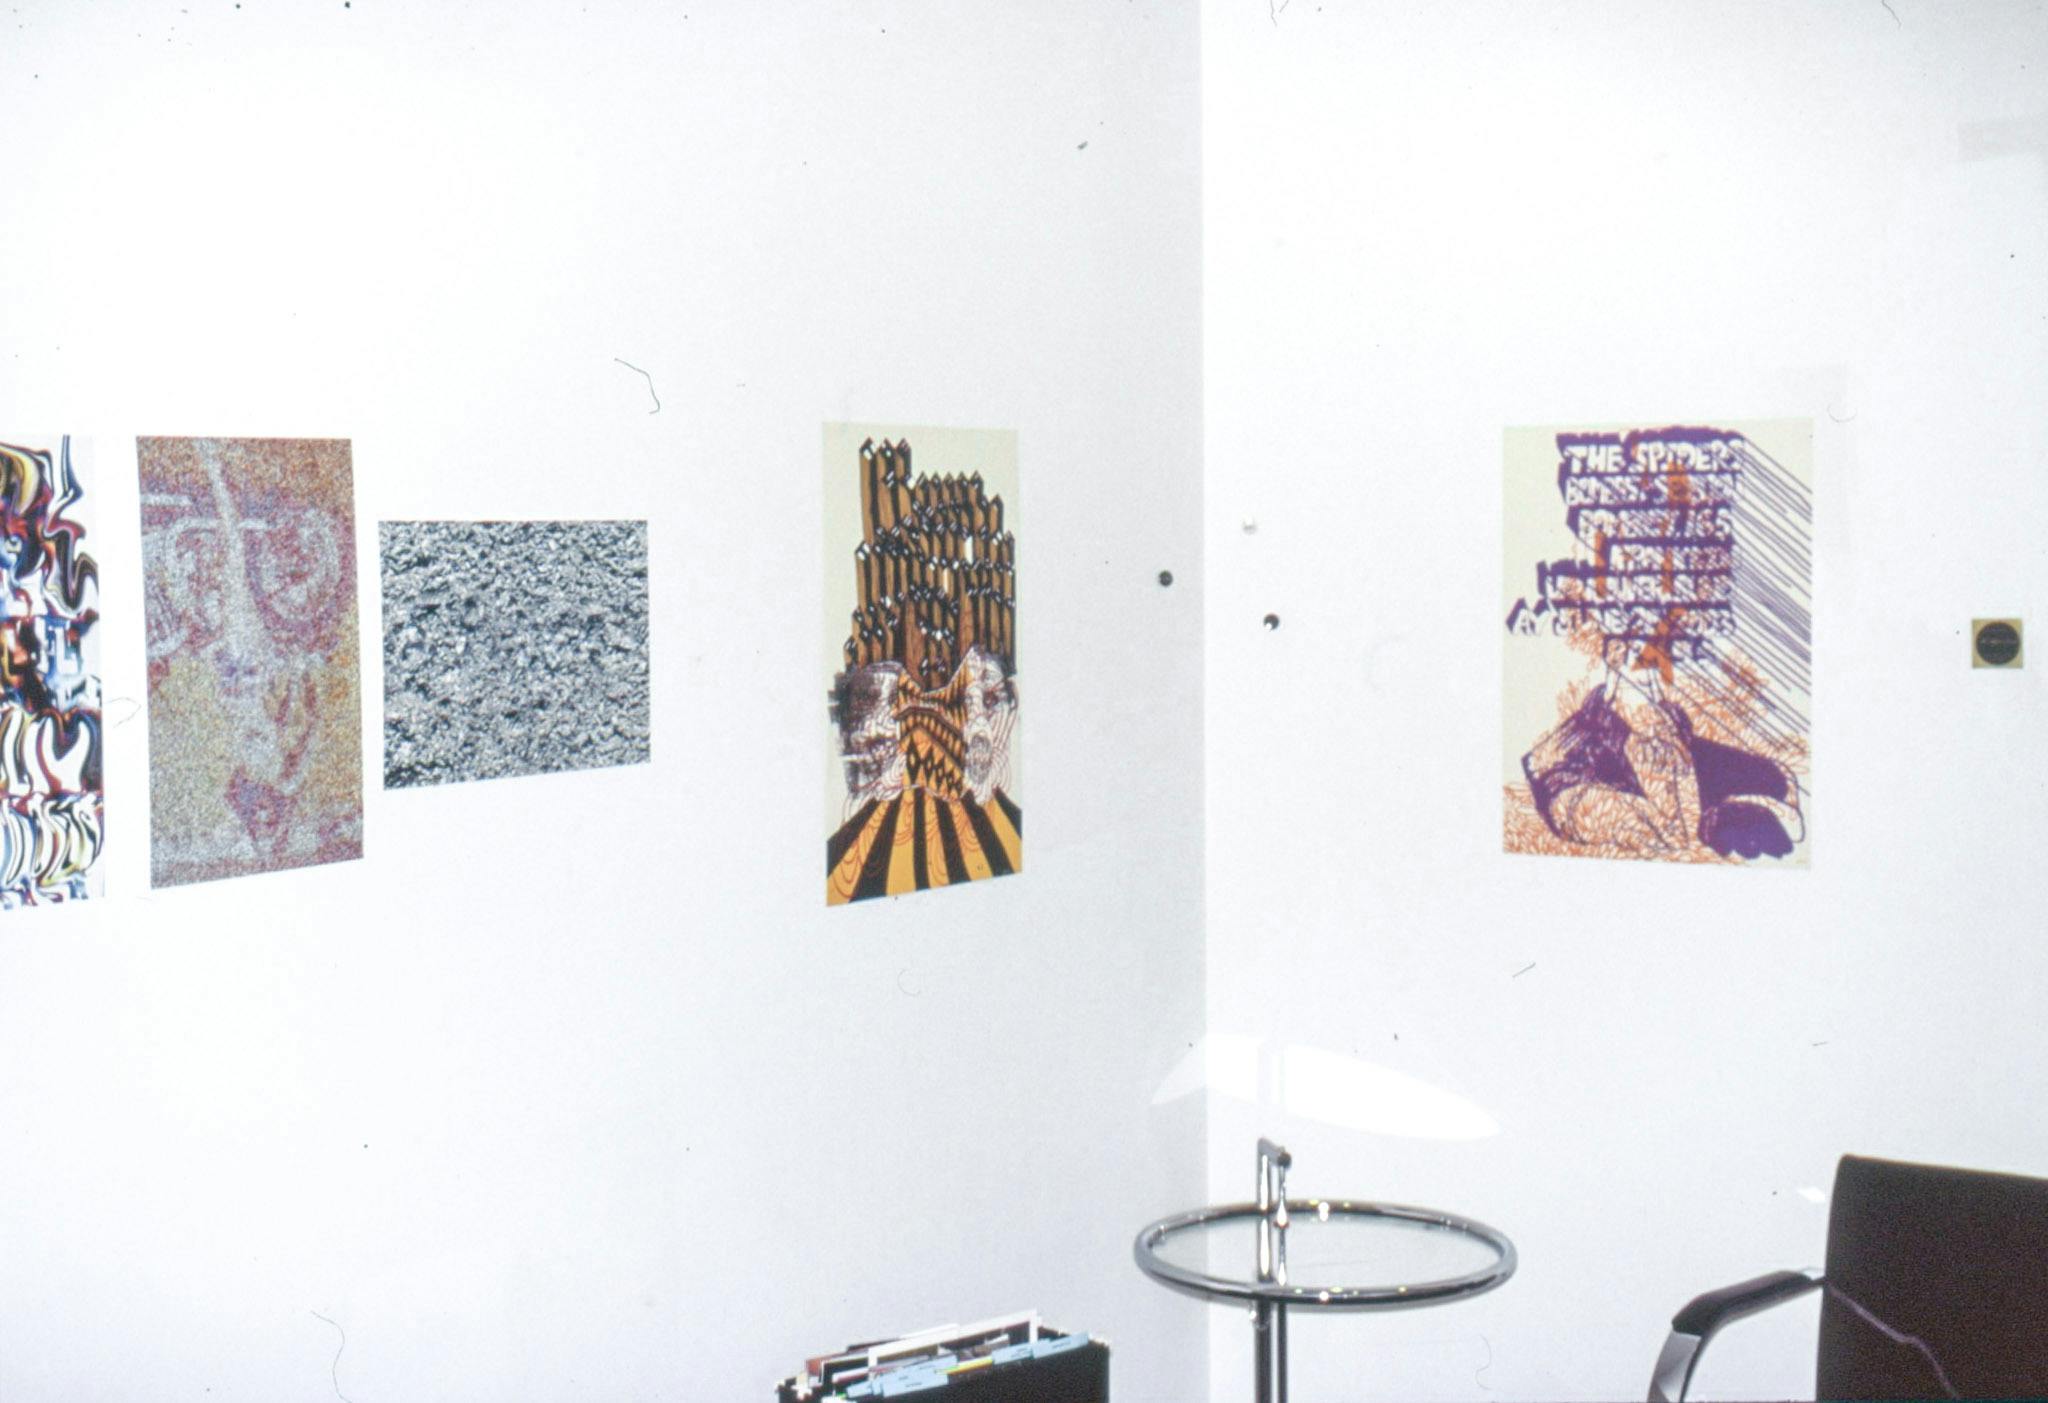 An install image of drawings on gallery walls. Two works closely installed with each other on the left wall are abstract drawings. The other two works show the combination of text and abstracted human-like figures.